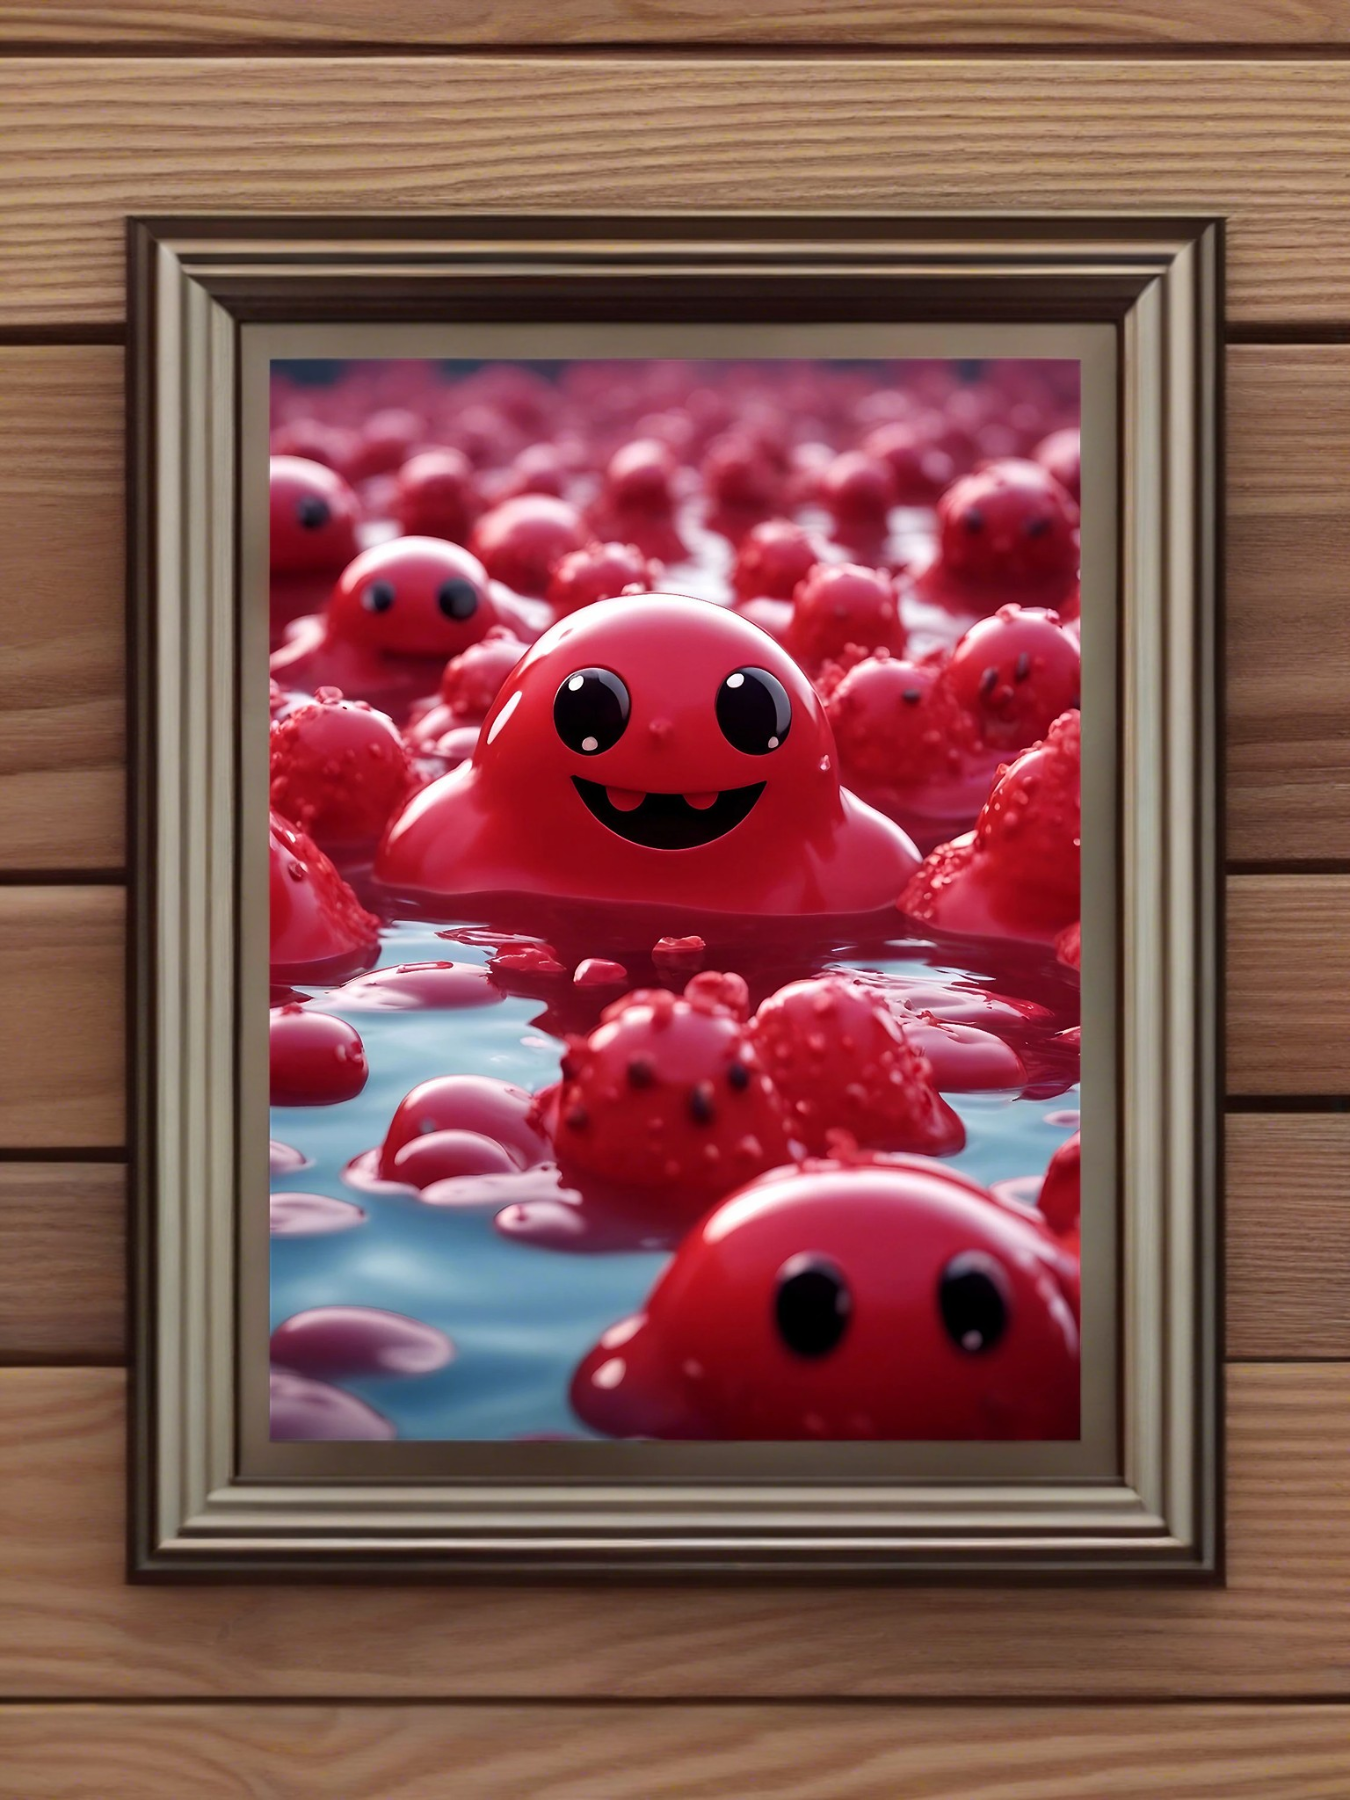 Invasion of the cute red slime monsters in the lake - fantasy mini photo poster - 27x20 cm 2